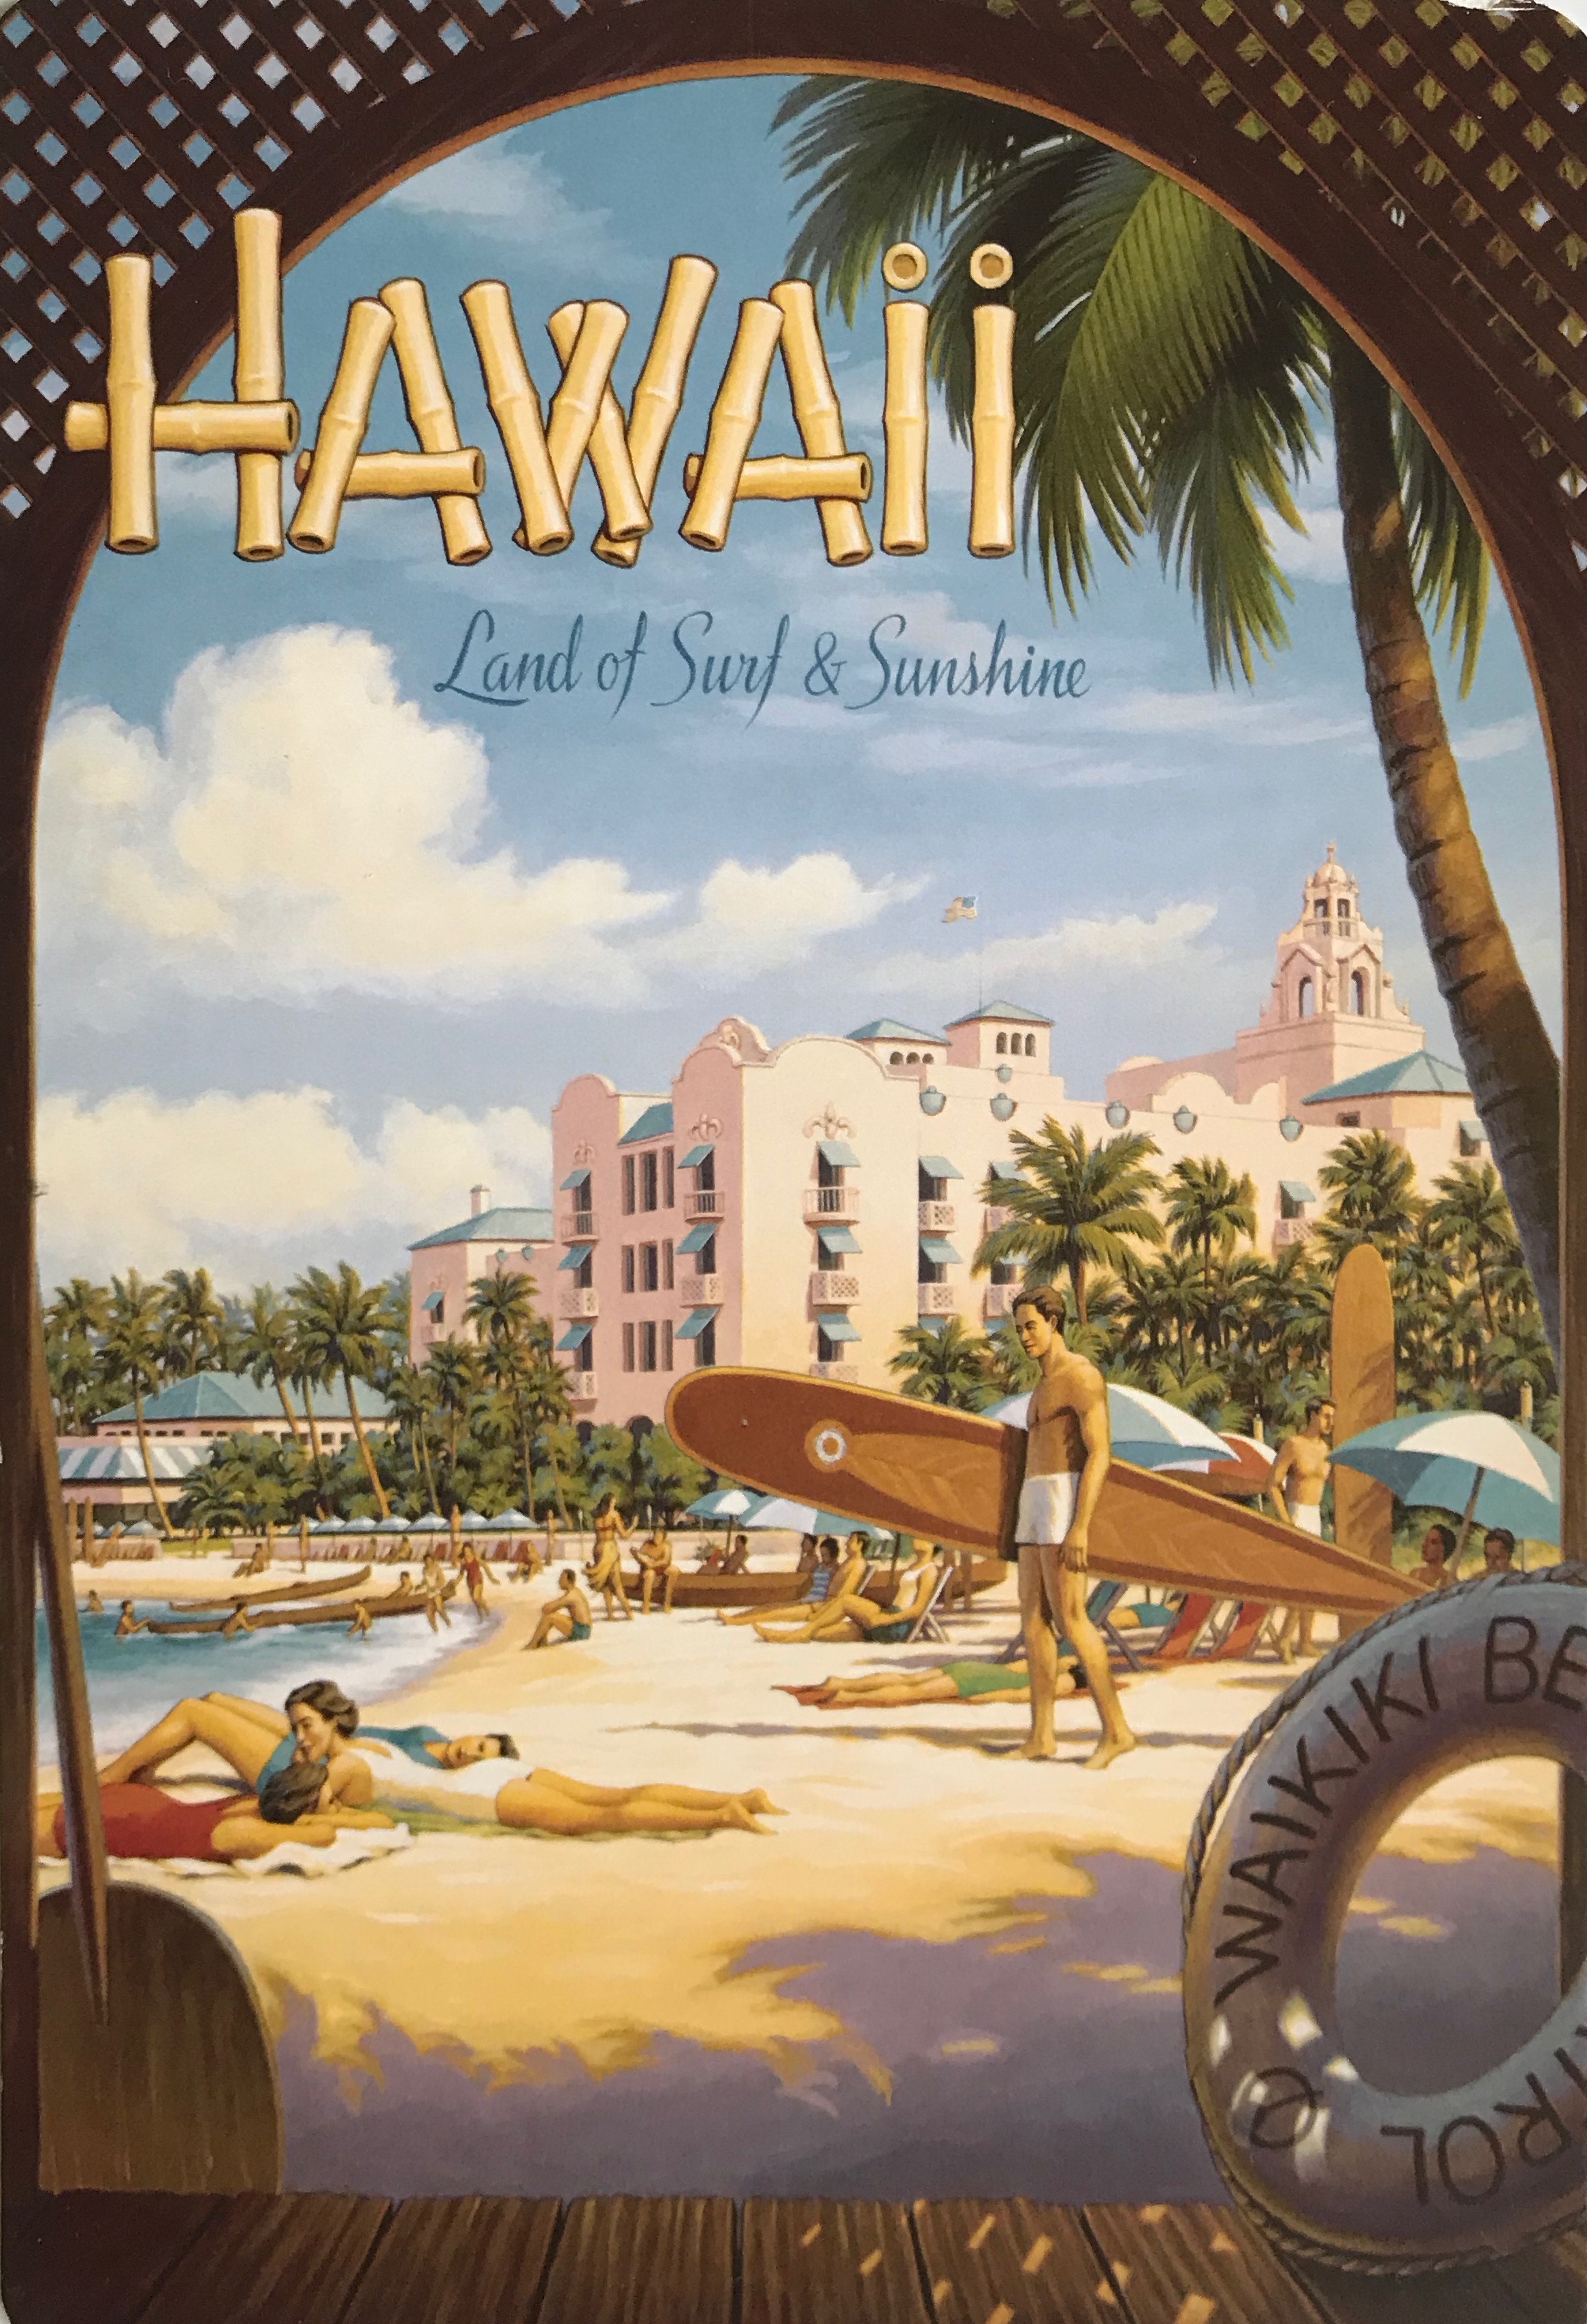 9 Vintage Hawaii Travel Posters (That Will Make You Want To Pack Your ...